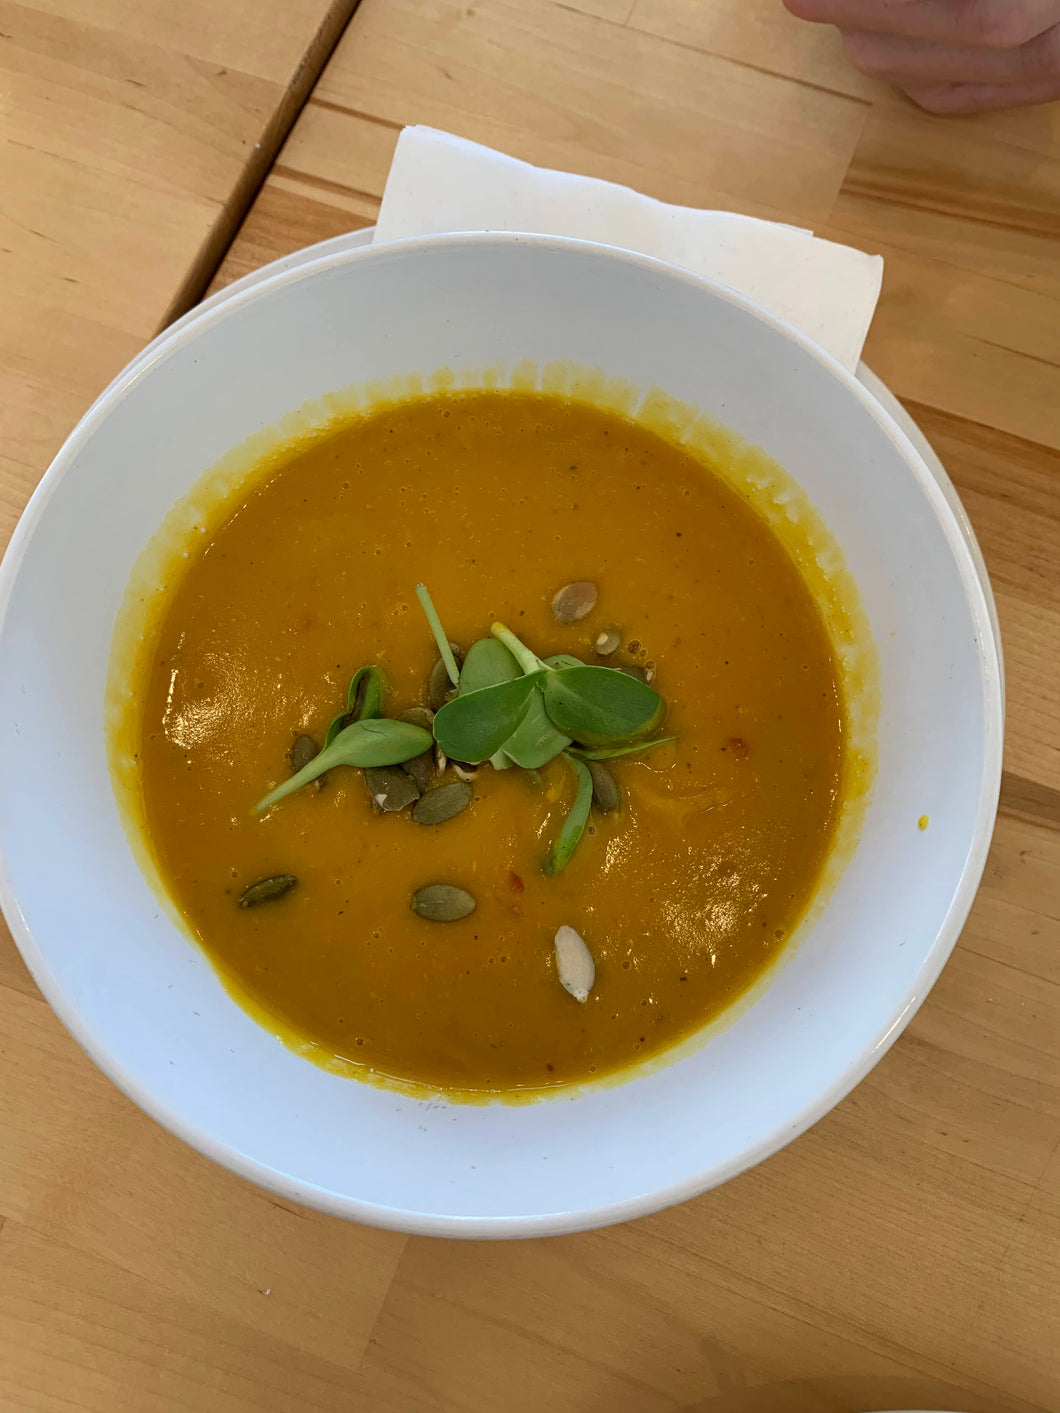 Acorn squash soup in a bowl with sunflower microgreen garnish